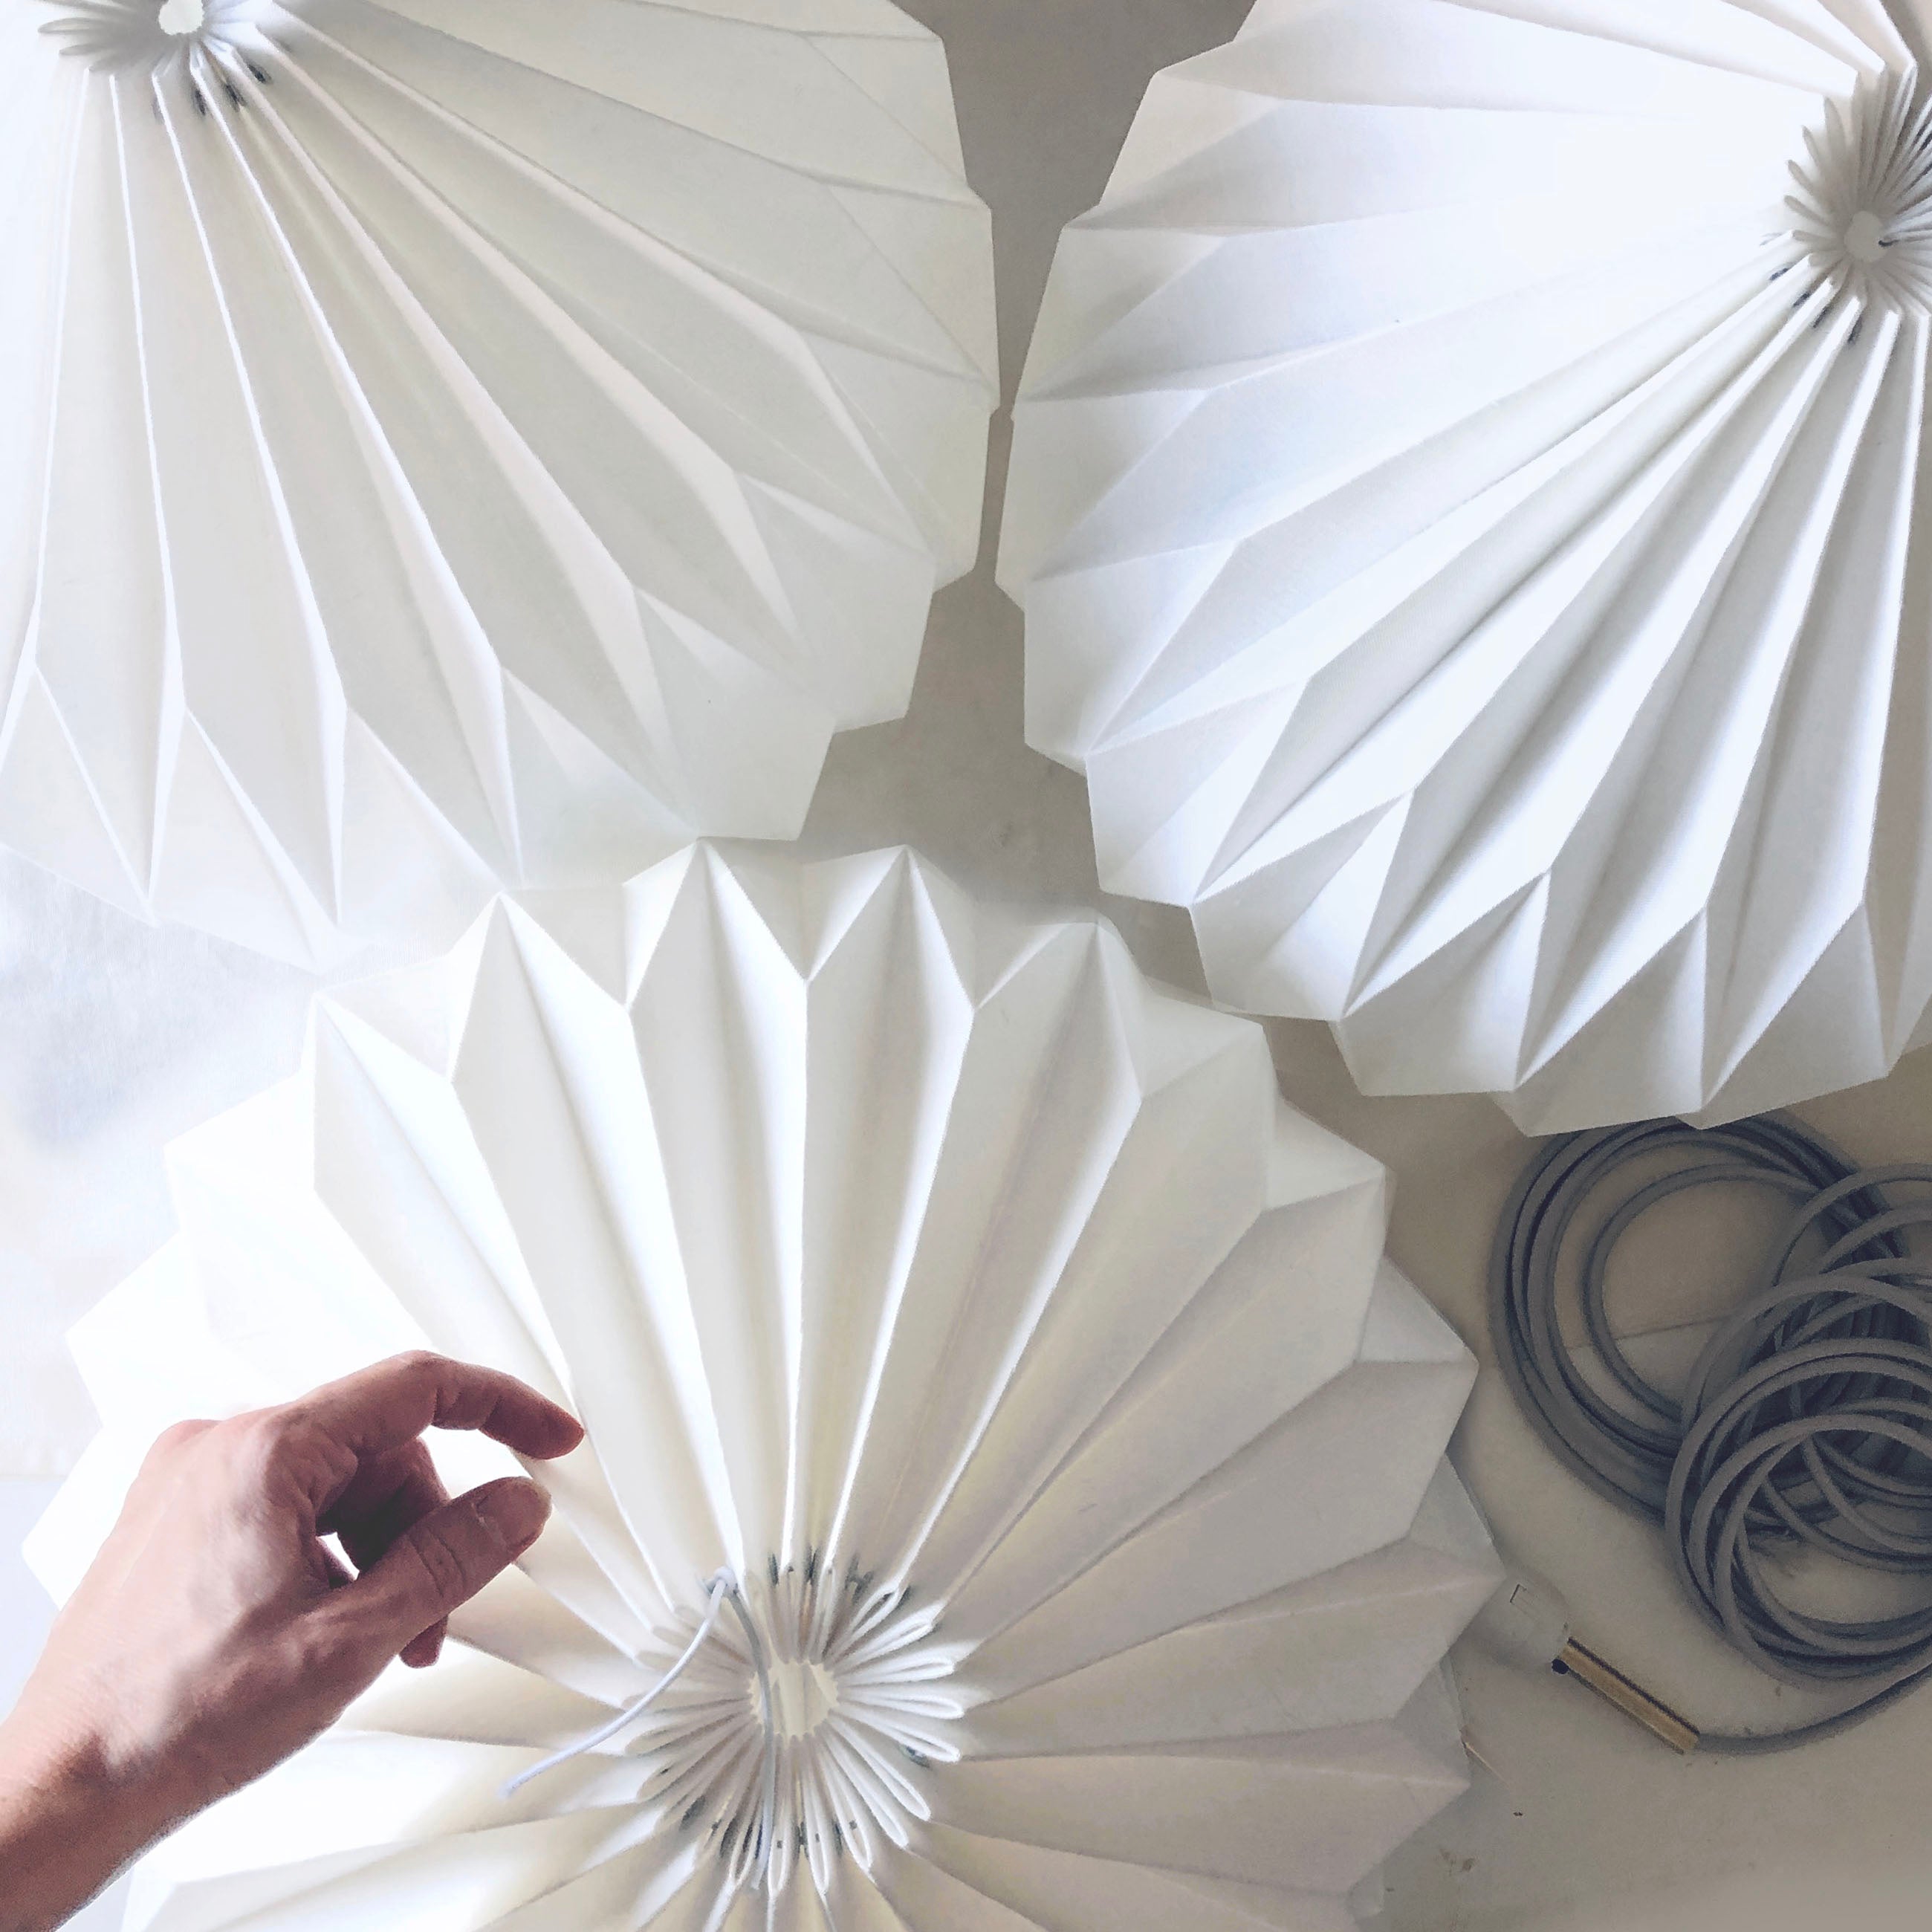 Modern Handmade lampshade for unique ambient lighting interior decoration made in usa